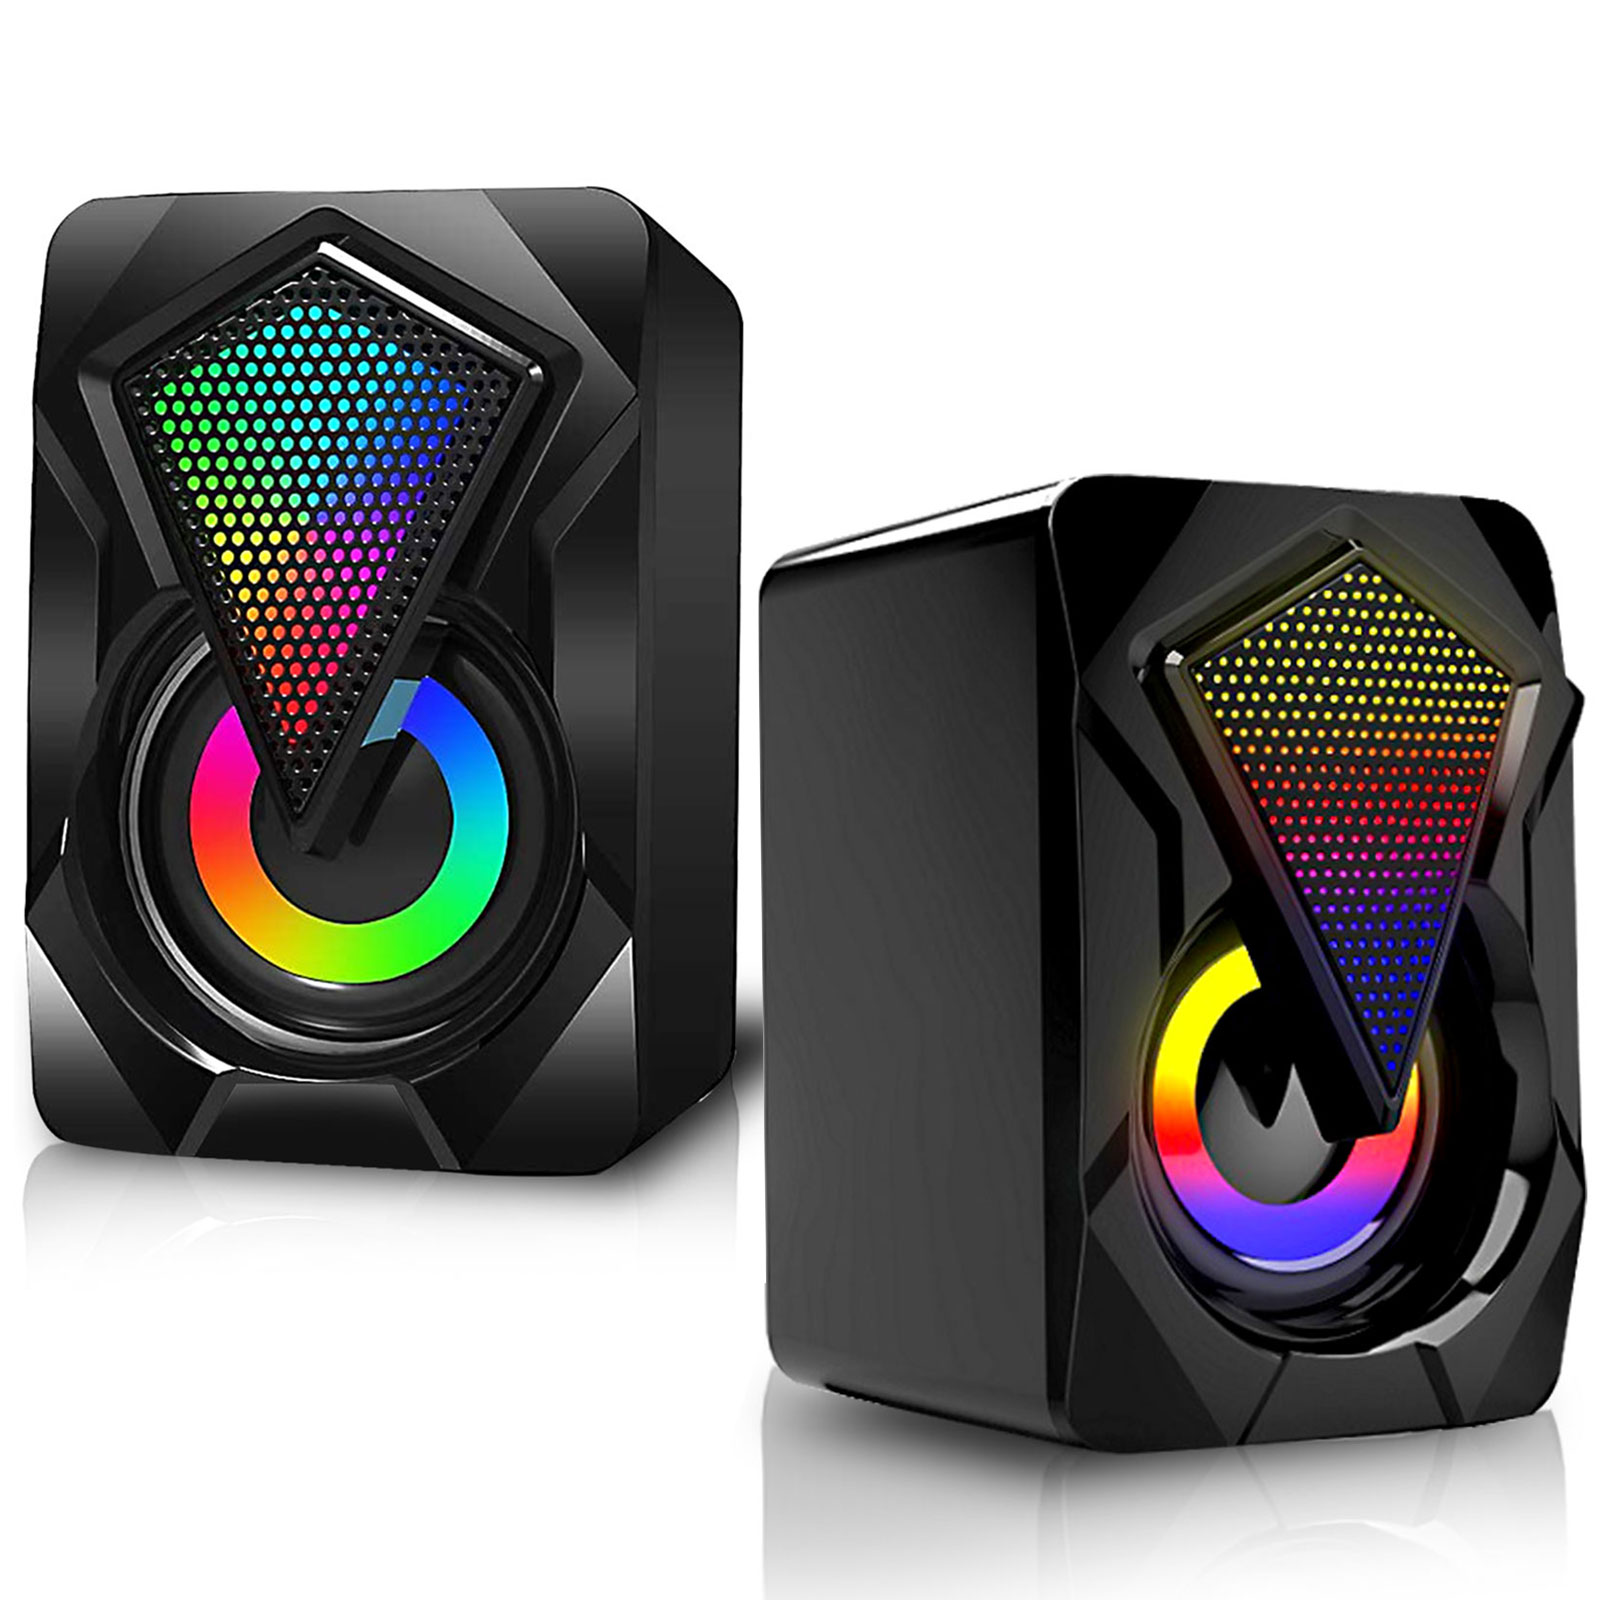 Computer Speakers RGB Gaming Speaker USB Powered Stereo 2.0 Volume Control PC Speakers with LED Light, Dual-Channel Multimedia Speakers for Computer Desktop Laptop PC Smartphone TV Game Machine(6W) - image 1 of 9